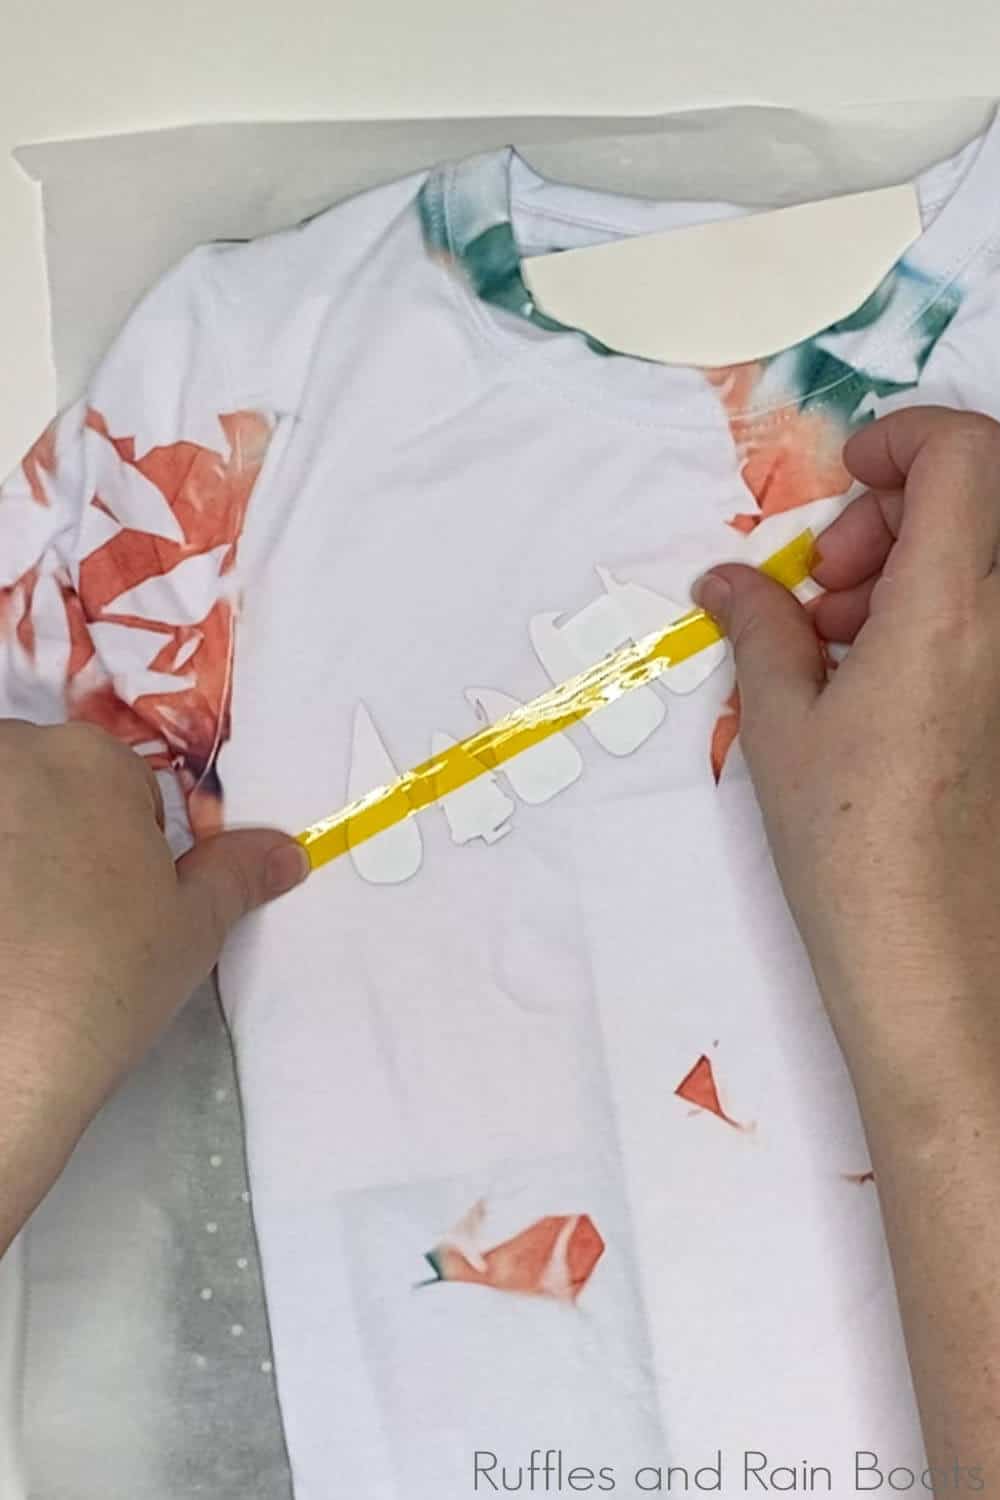 in-process step of taping gnome design on a shirt to make a tik tok sublimation glass shard shirt with gnomes